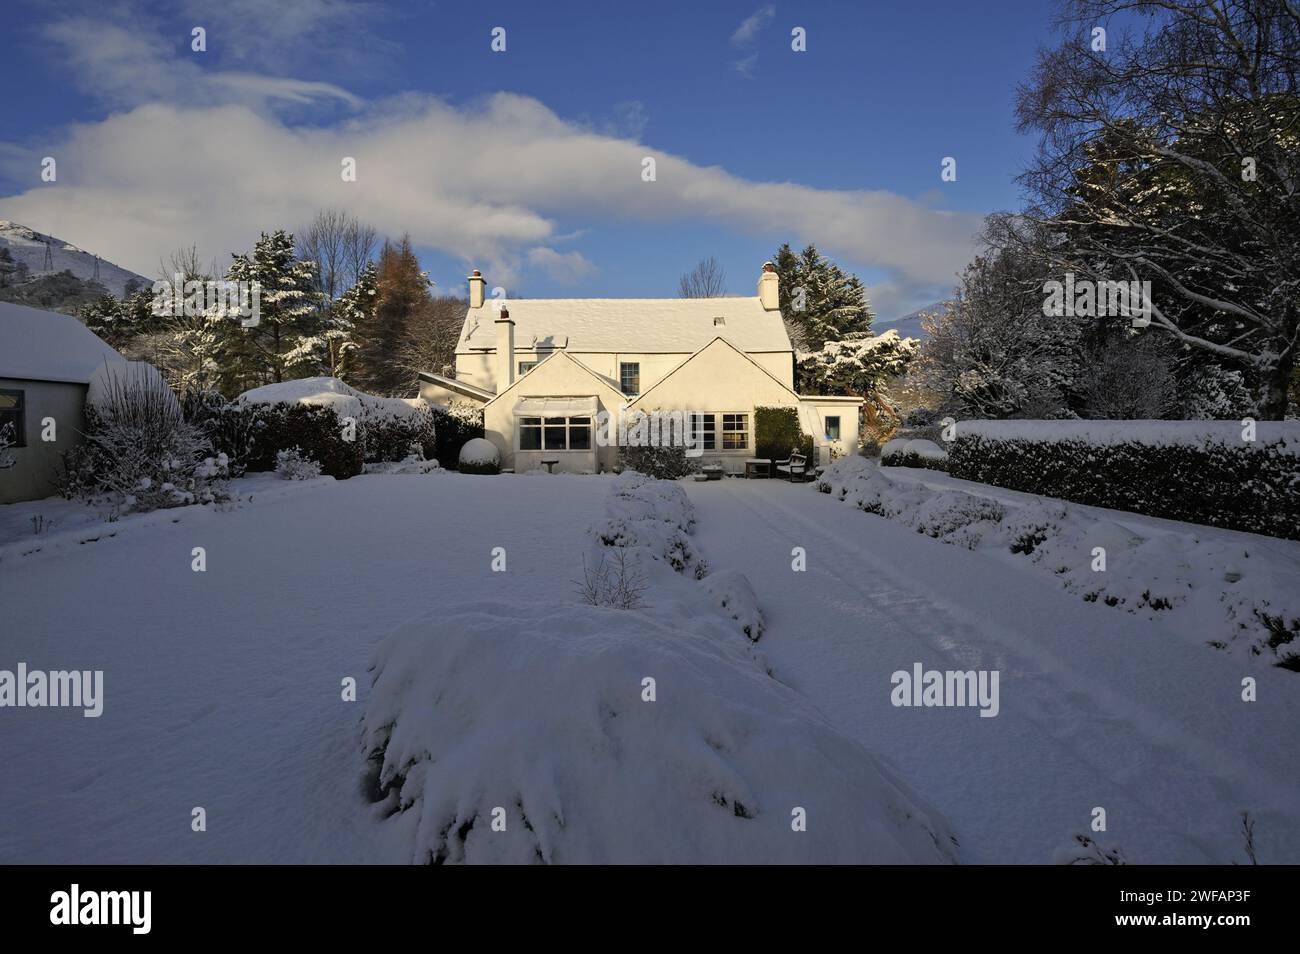 Snow-covered trees in a country house and garden in winter, Killin, Perthshire, Scotland, UK Stock Photo